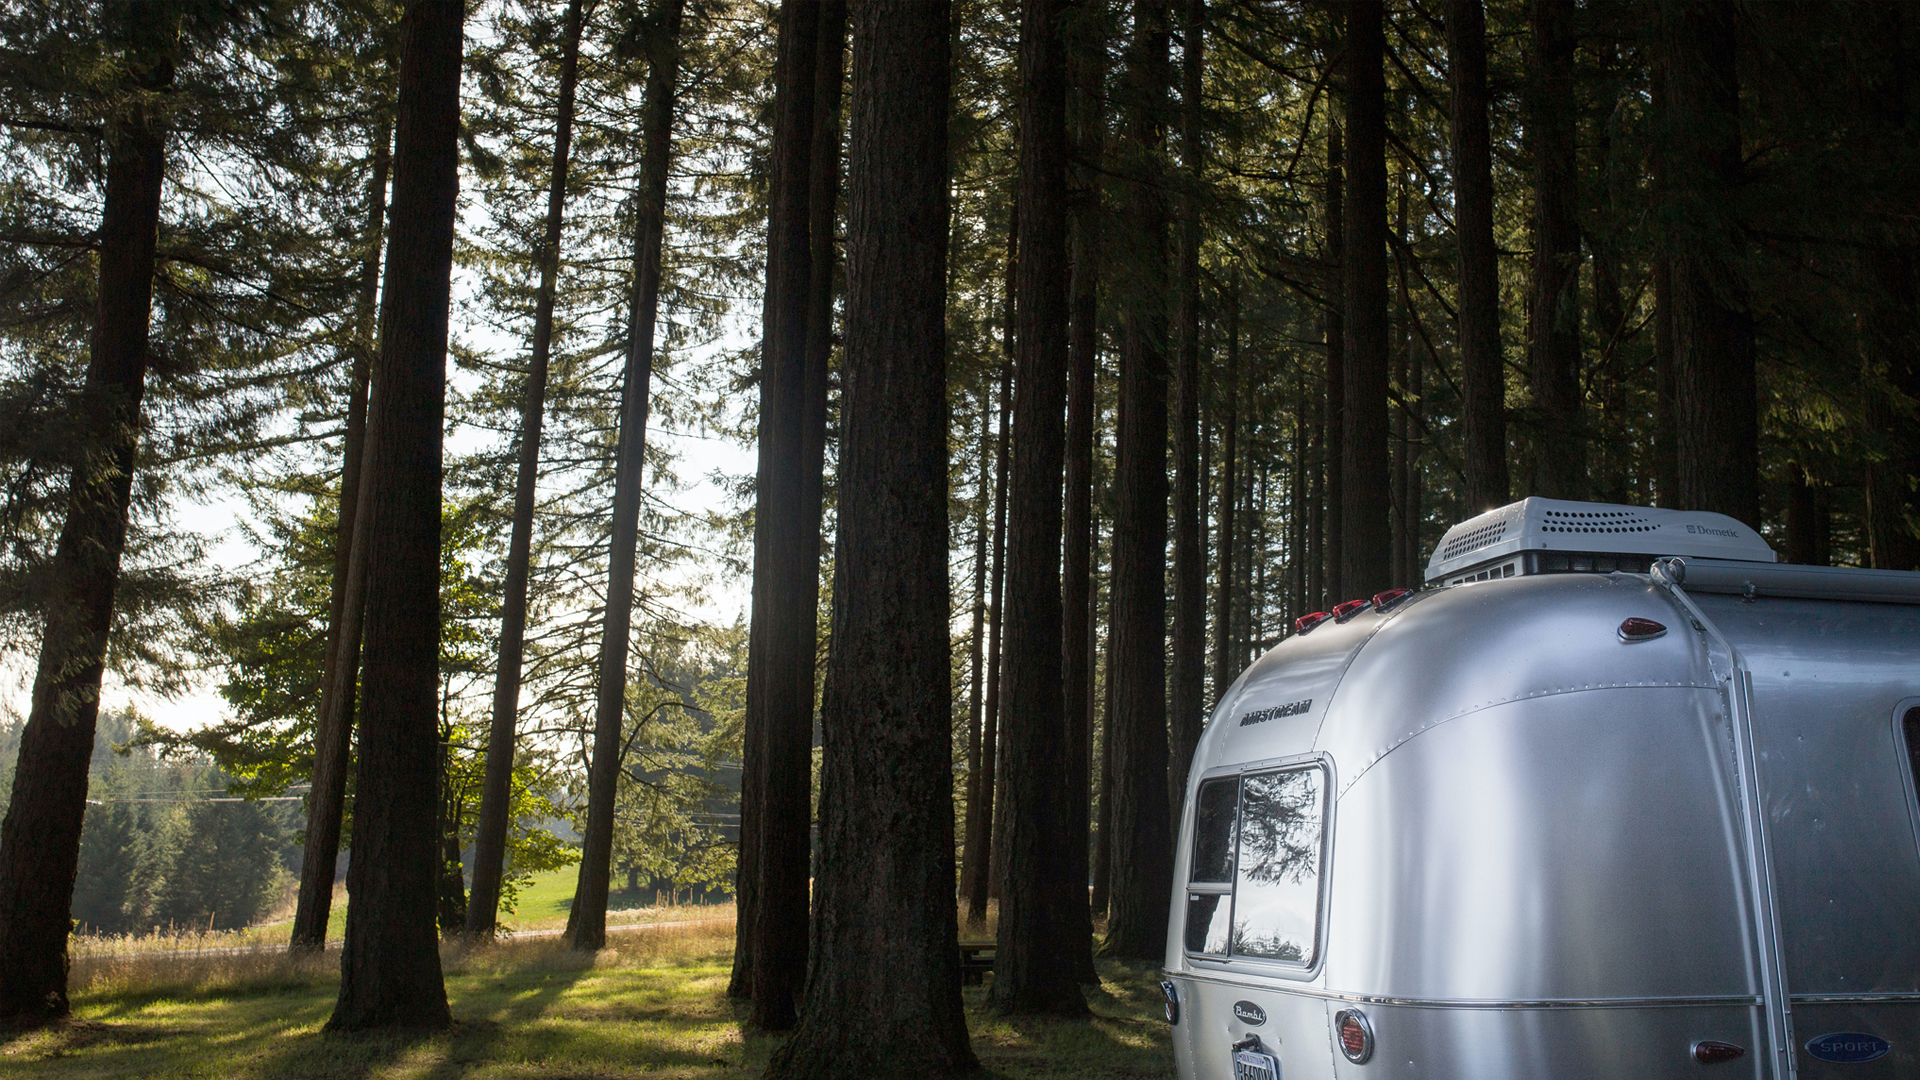 Airstream Travel Trailer sitting in a forest